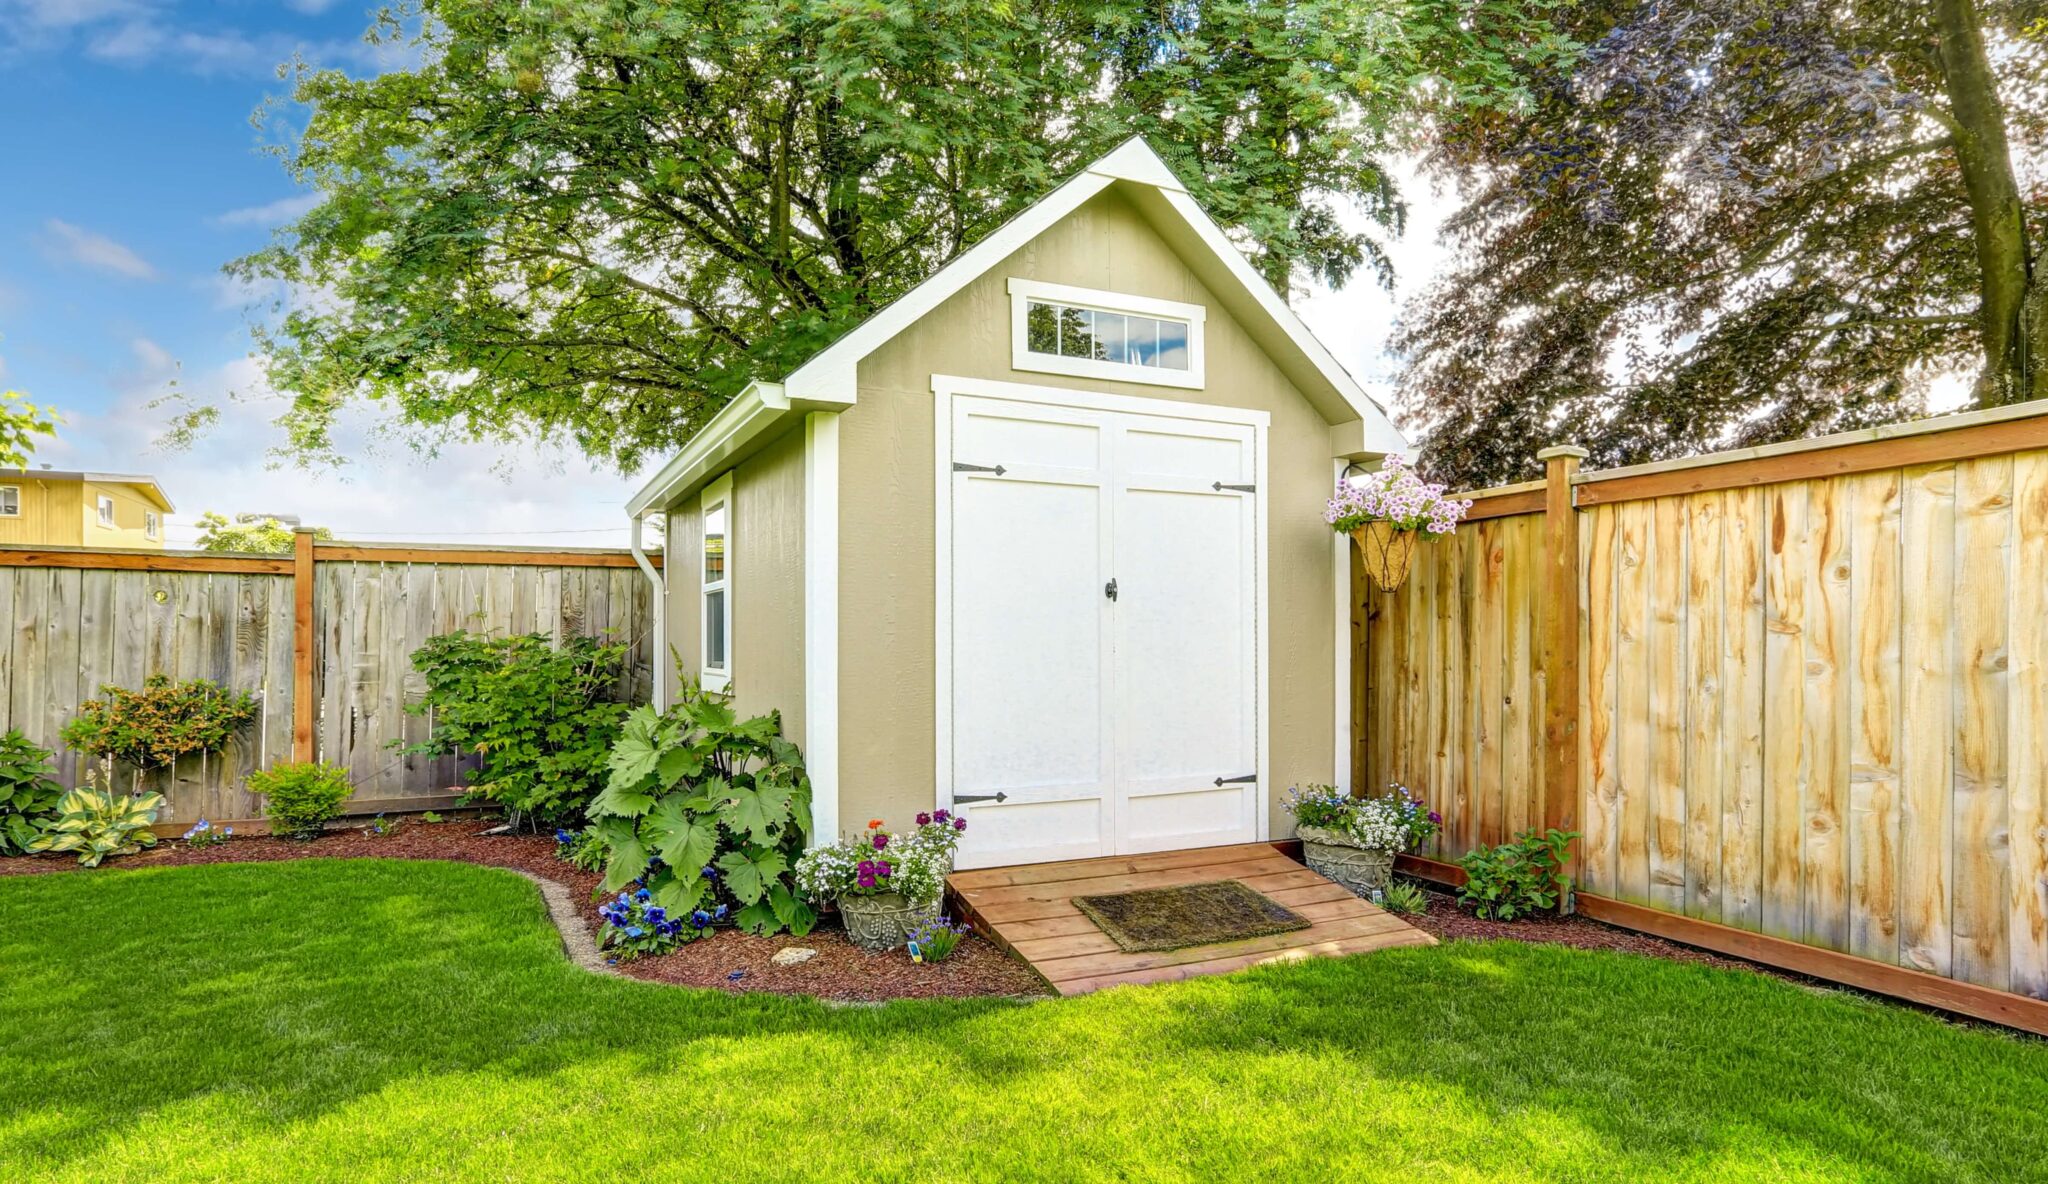 Beautiful new shed with flower bed on backyard area 